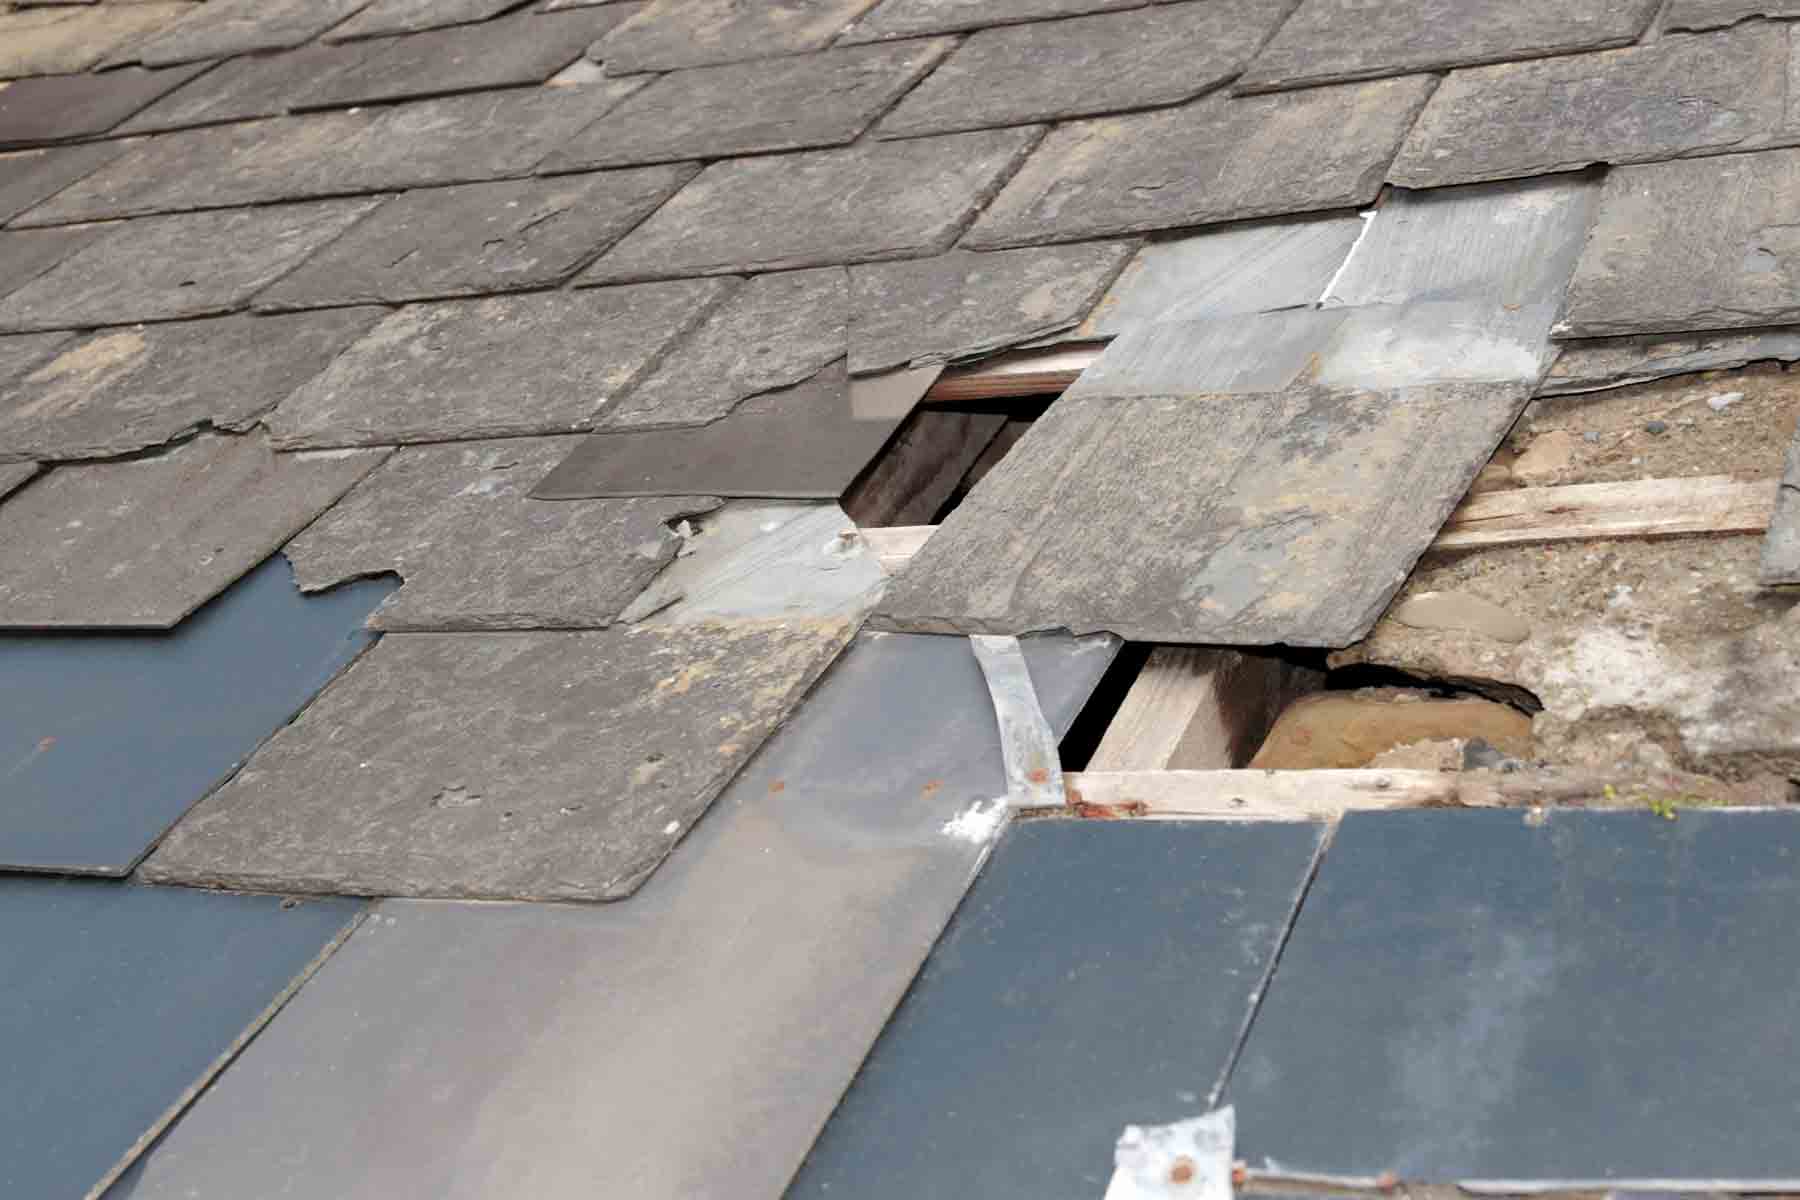 Common Causes of Roof Deterioration